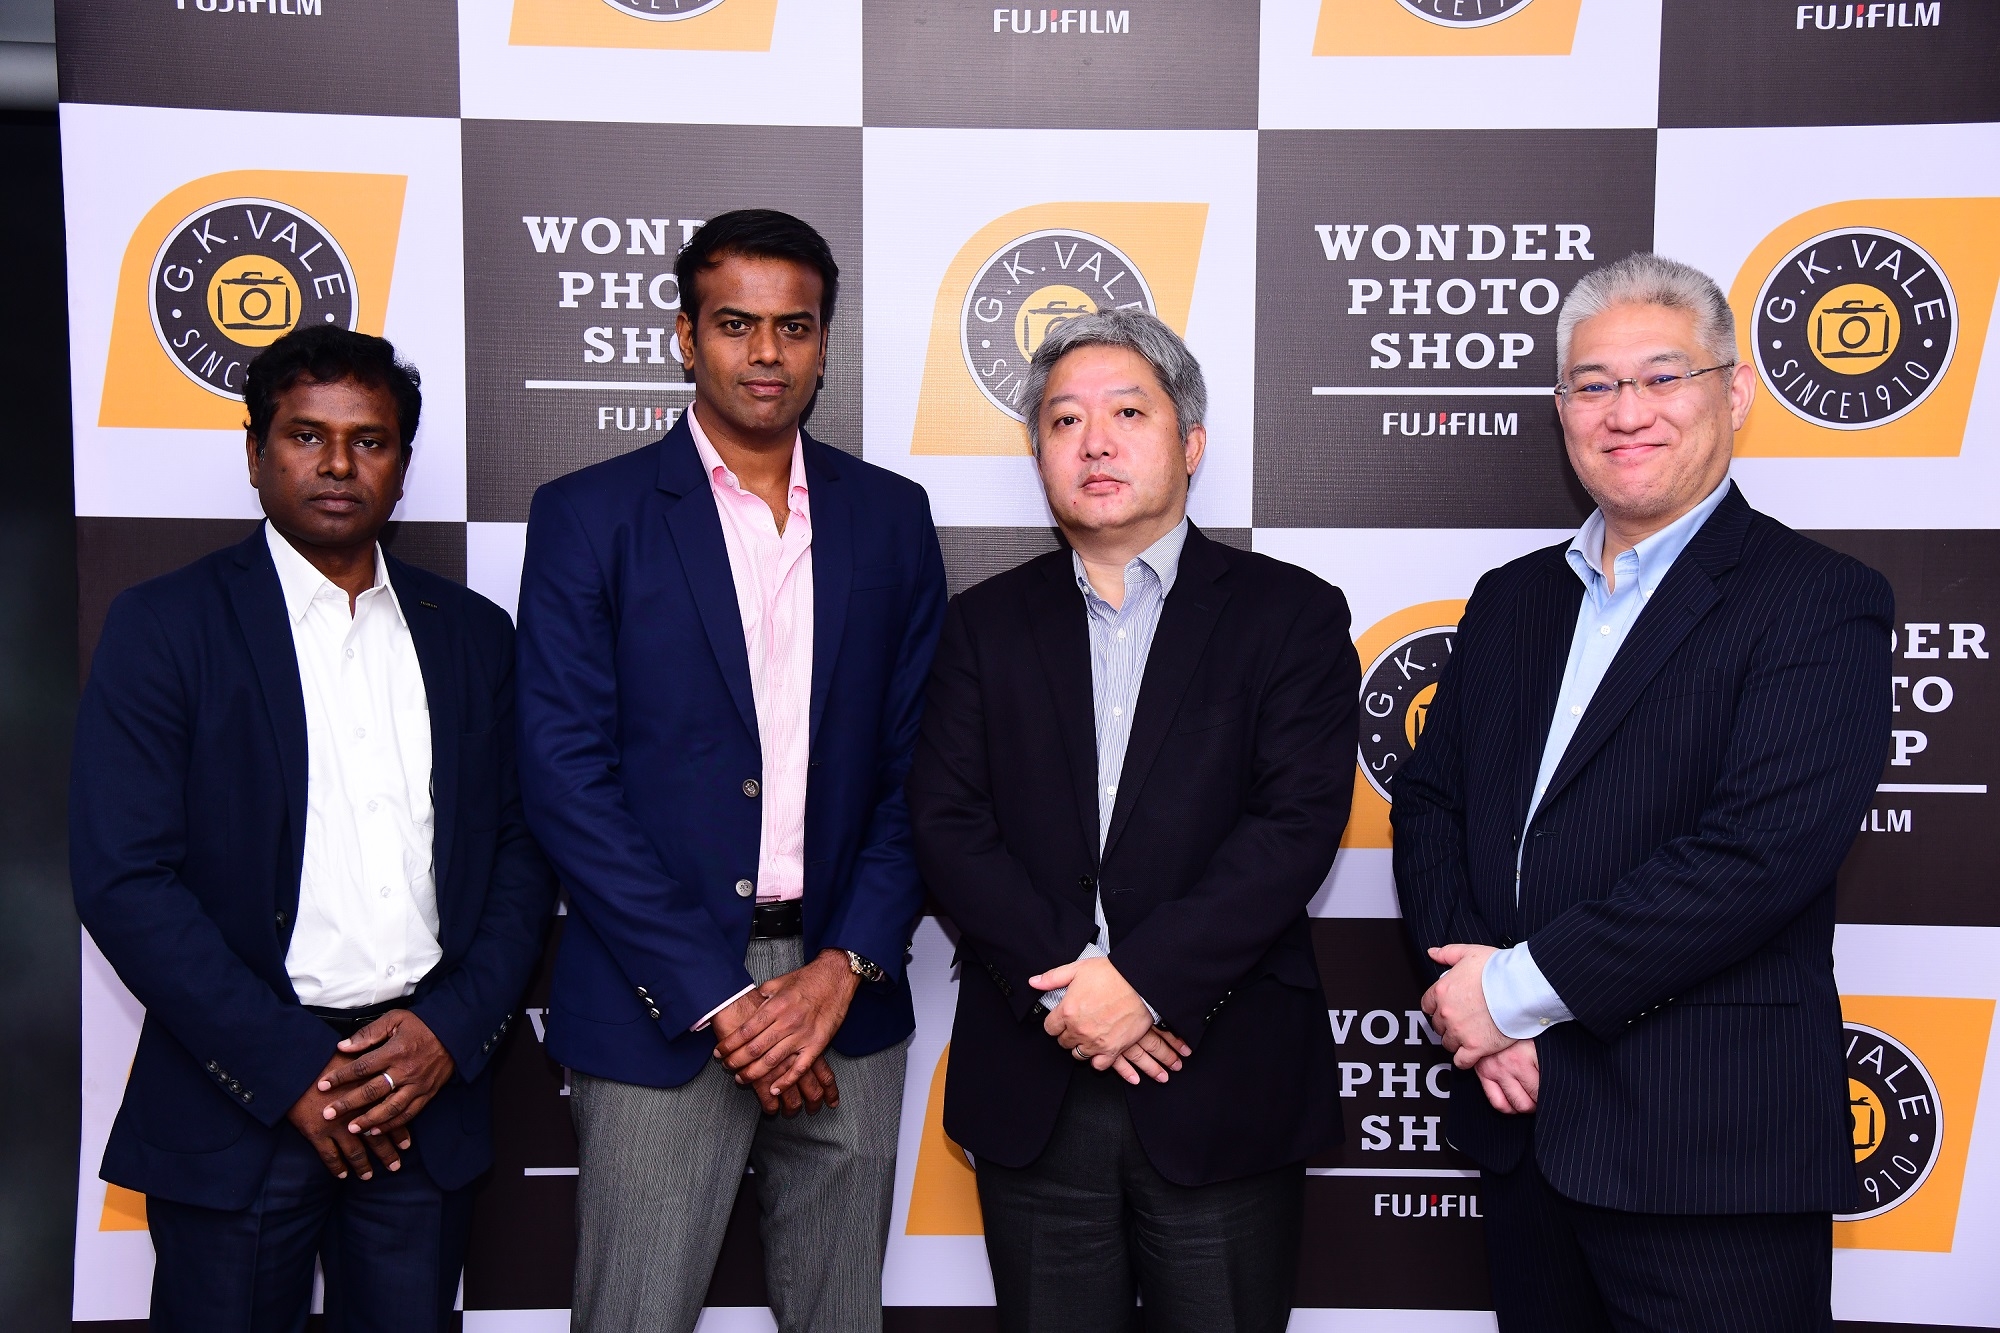 FujiFilm Indian & GK Vale Opens First Ever Co-branded Wonder Photo Shop in Bengaluru